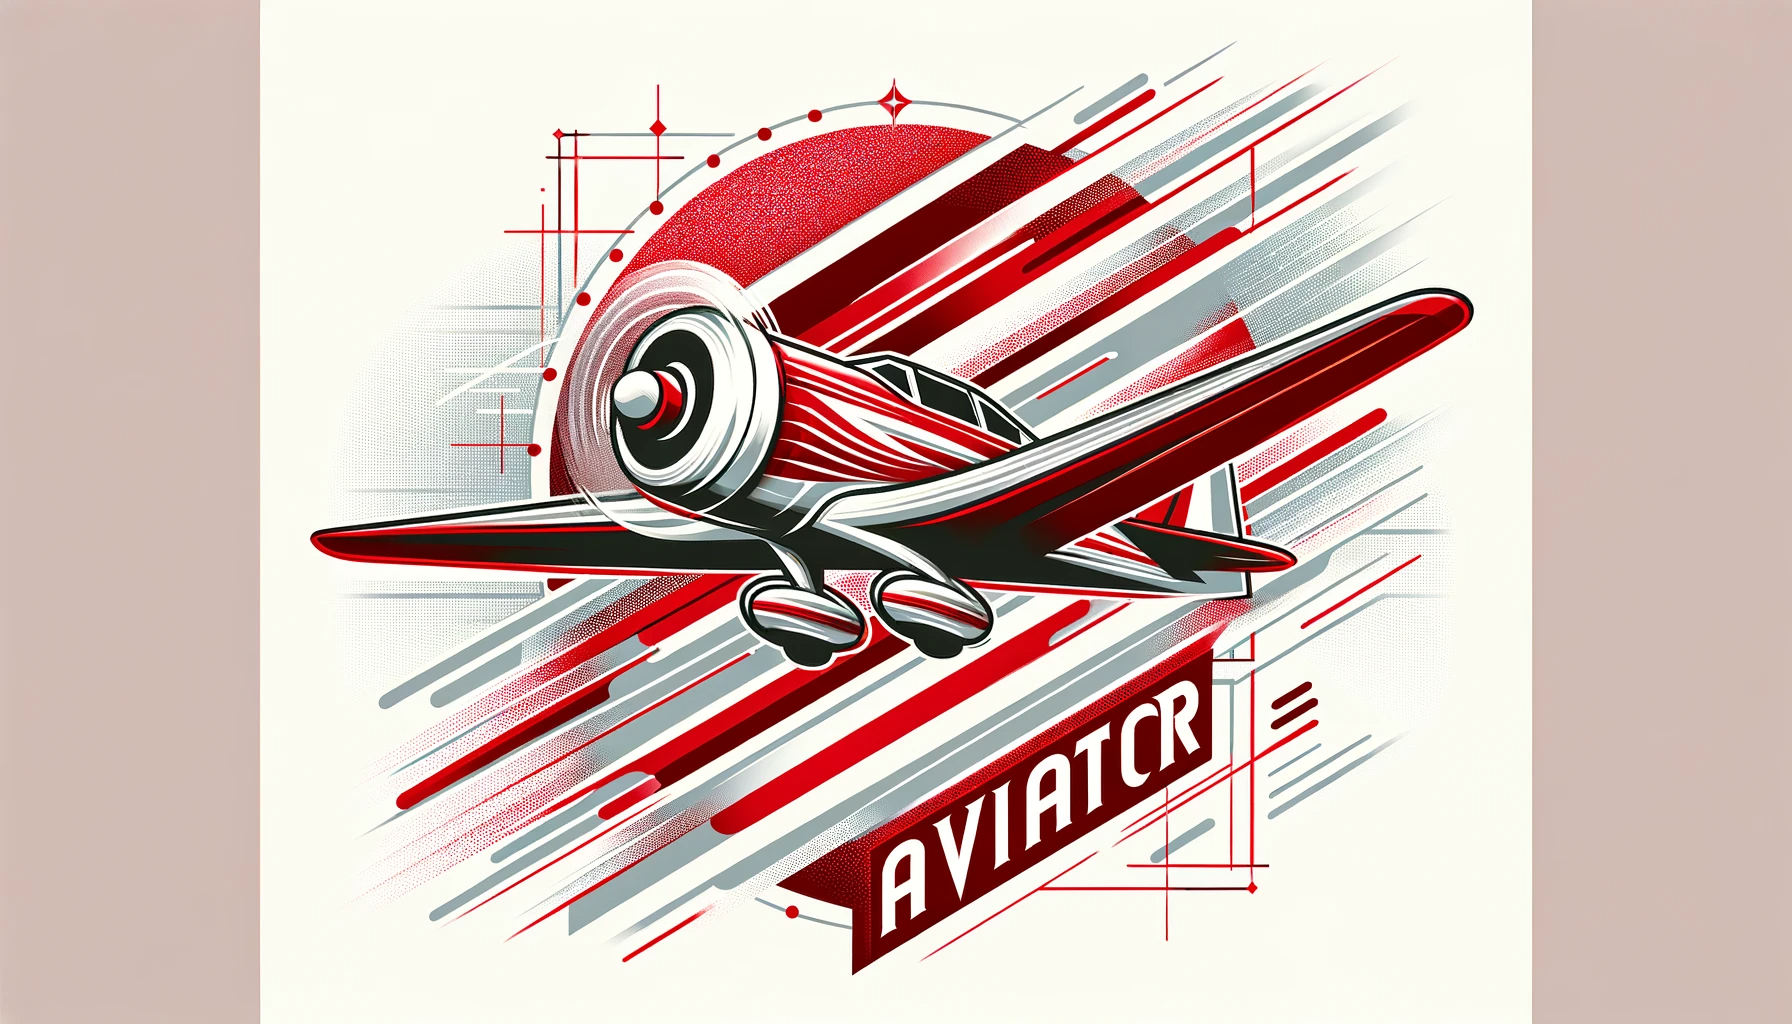 a stylised red aircraft with white accents, set against a geometric pattern in shades of grey and red. The aircraft is depicted in a dynamic pose, which creates the impression of speed and movement. At the bottom of the painting there is an inscription 